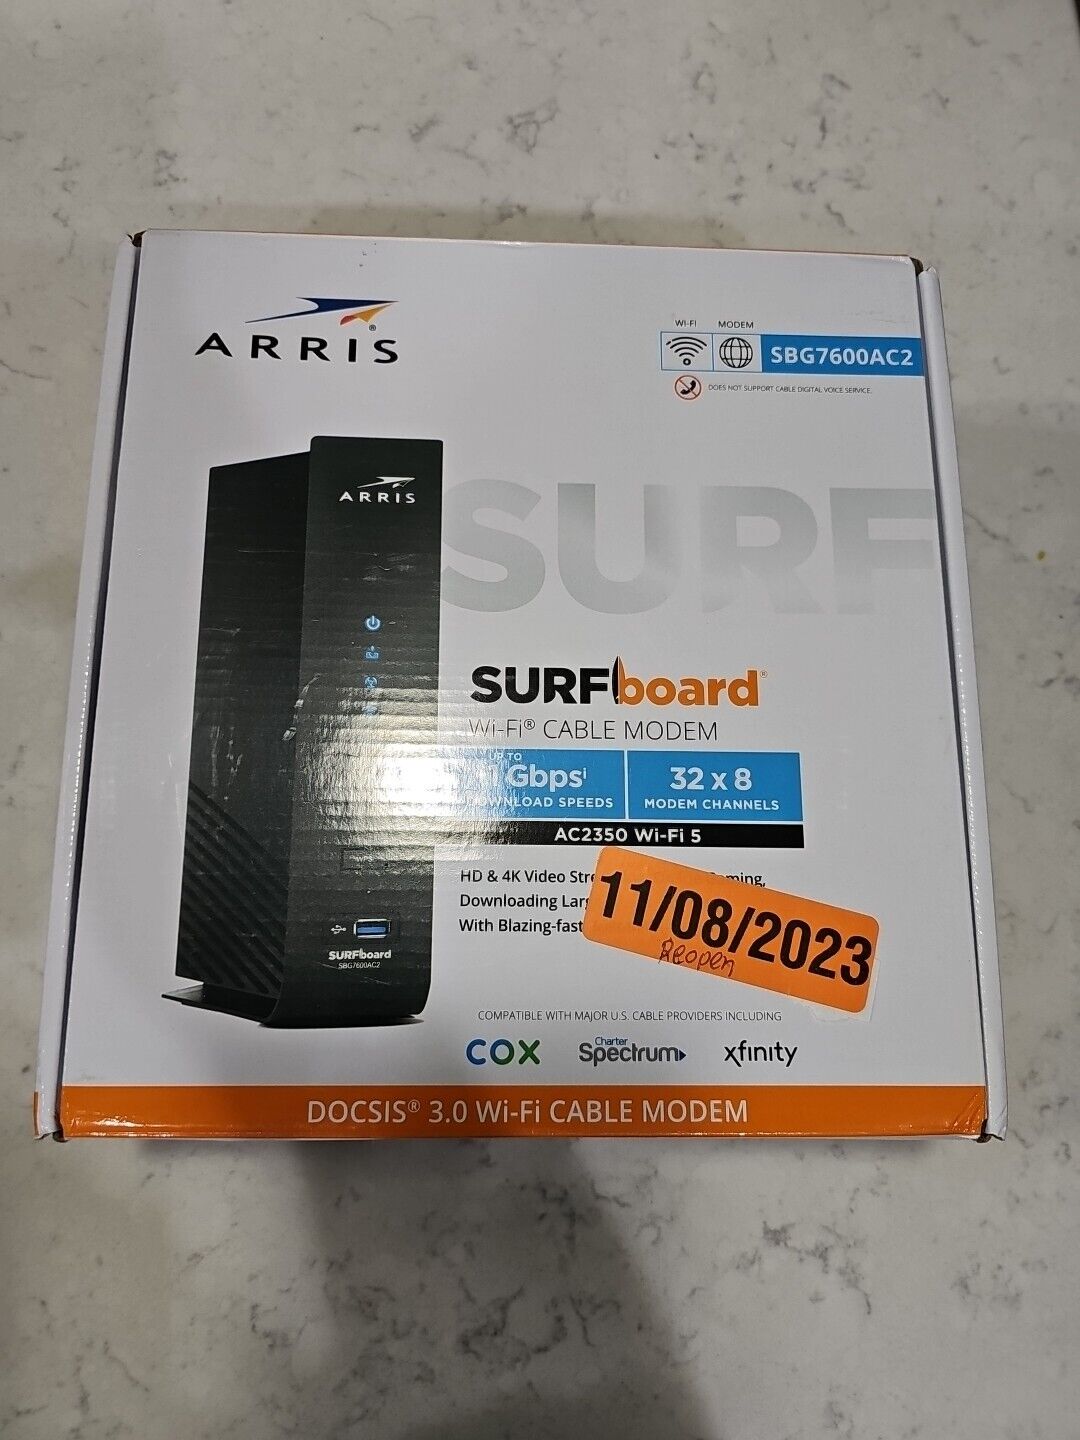 ARRIS SURFboard SBG7600AC2 DOCSIS 3.0 Cable Modem & AC2350 Wi-Fi Router